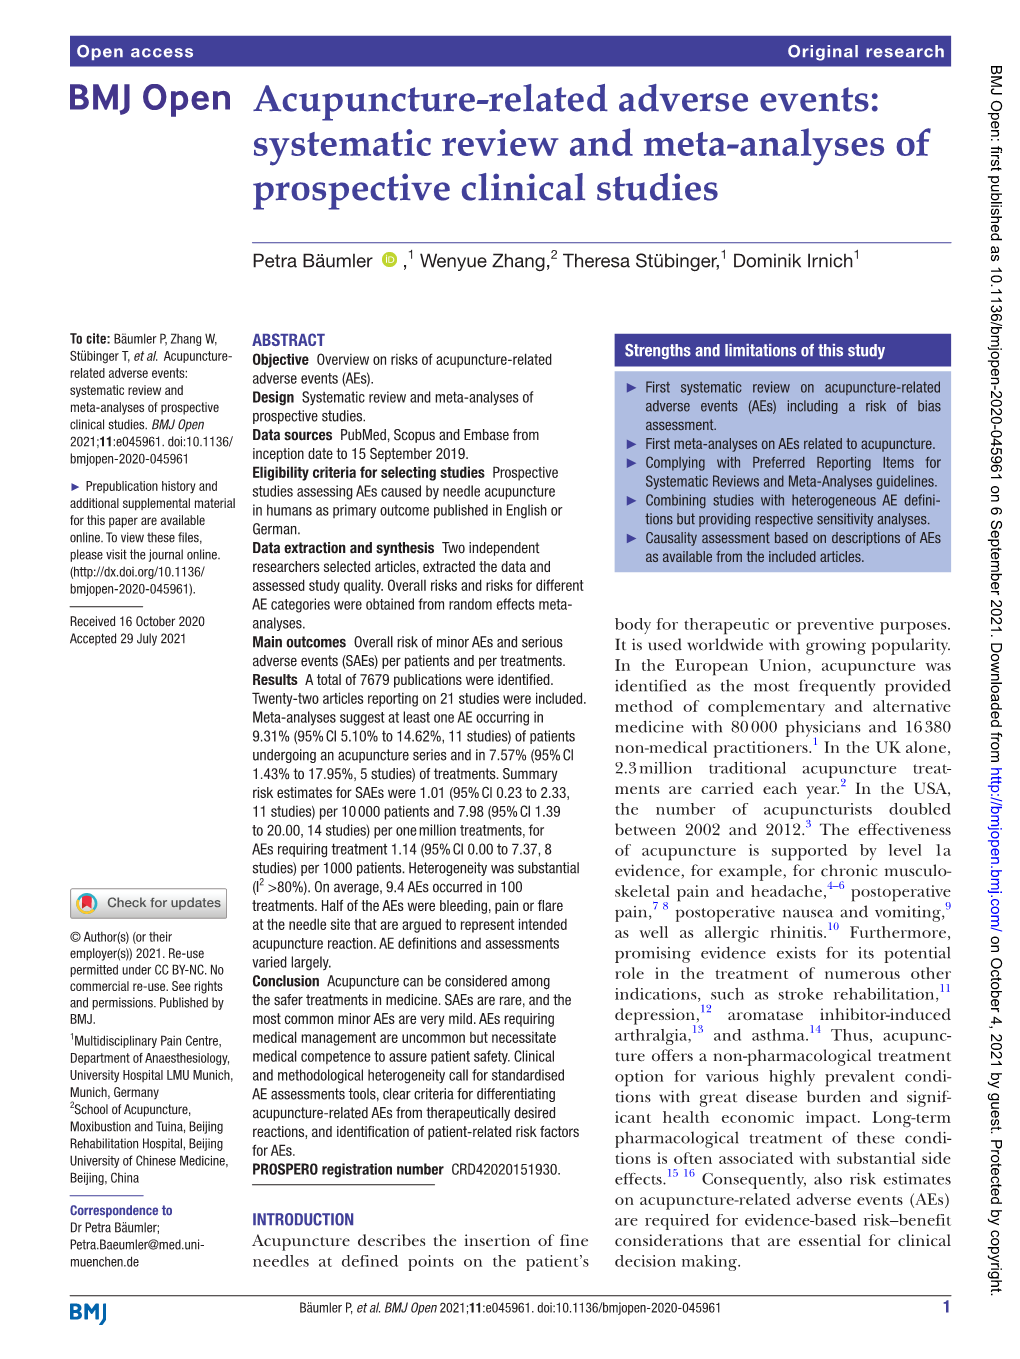 Acupuncture- Related Adverse Events: Systematic Review and Meta